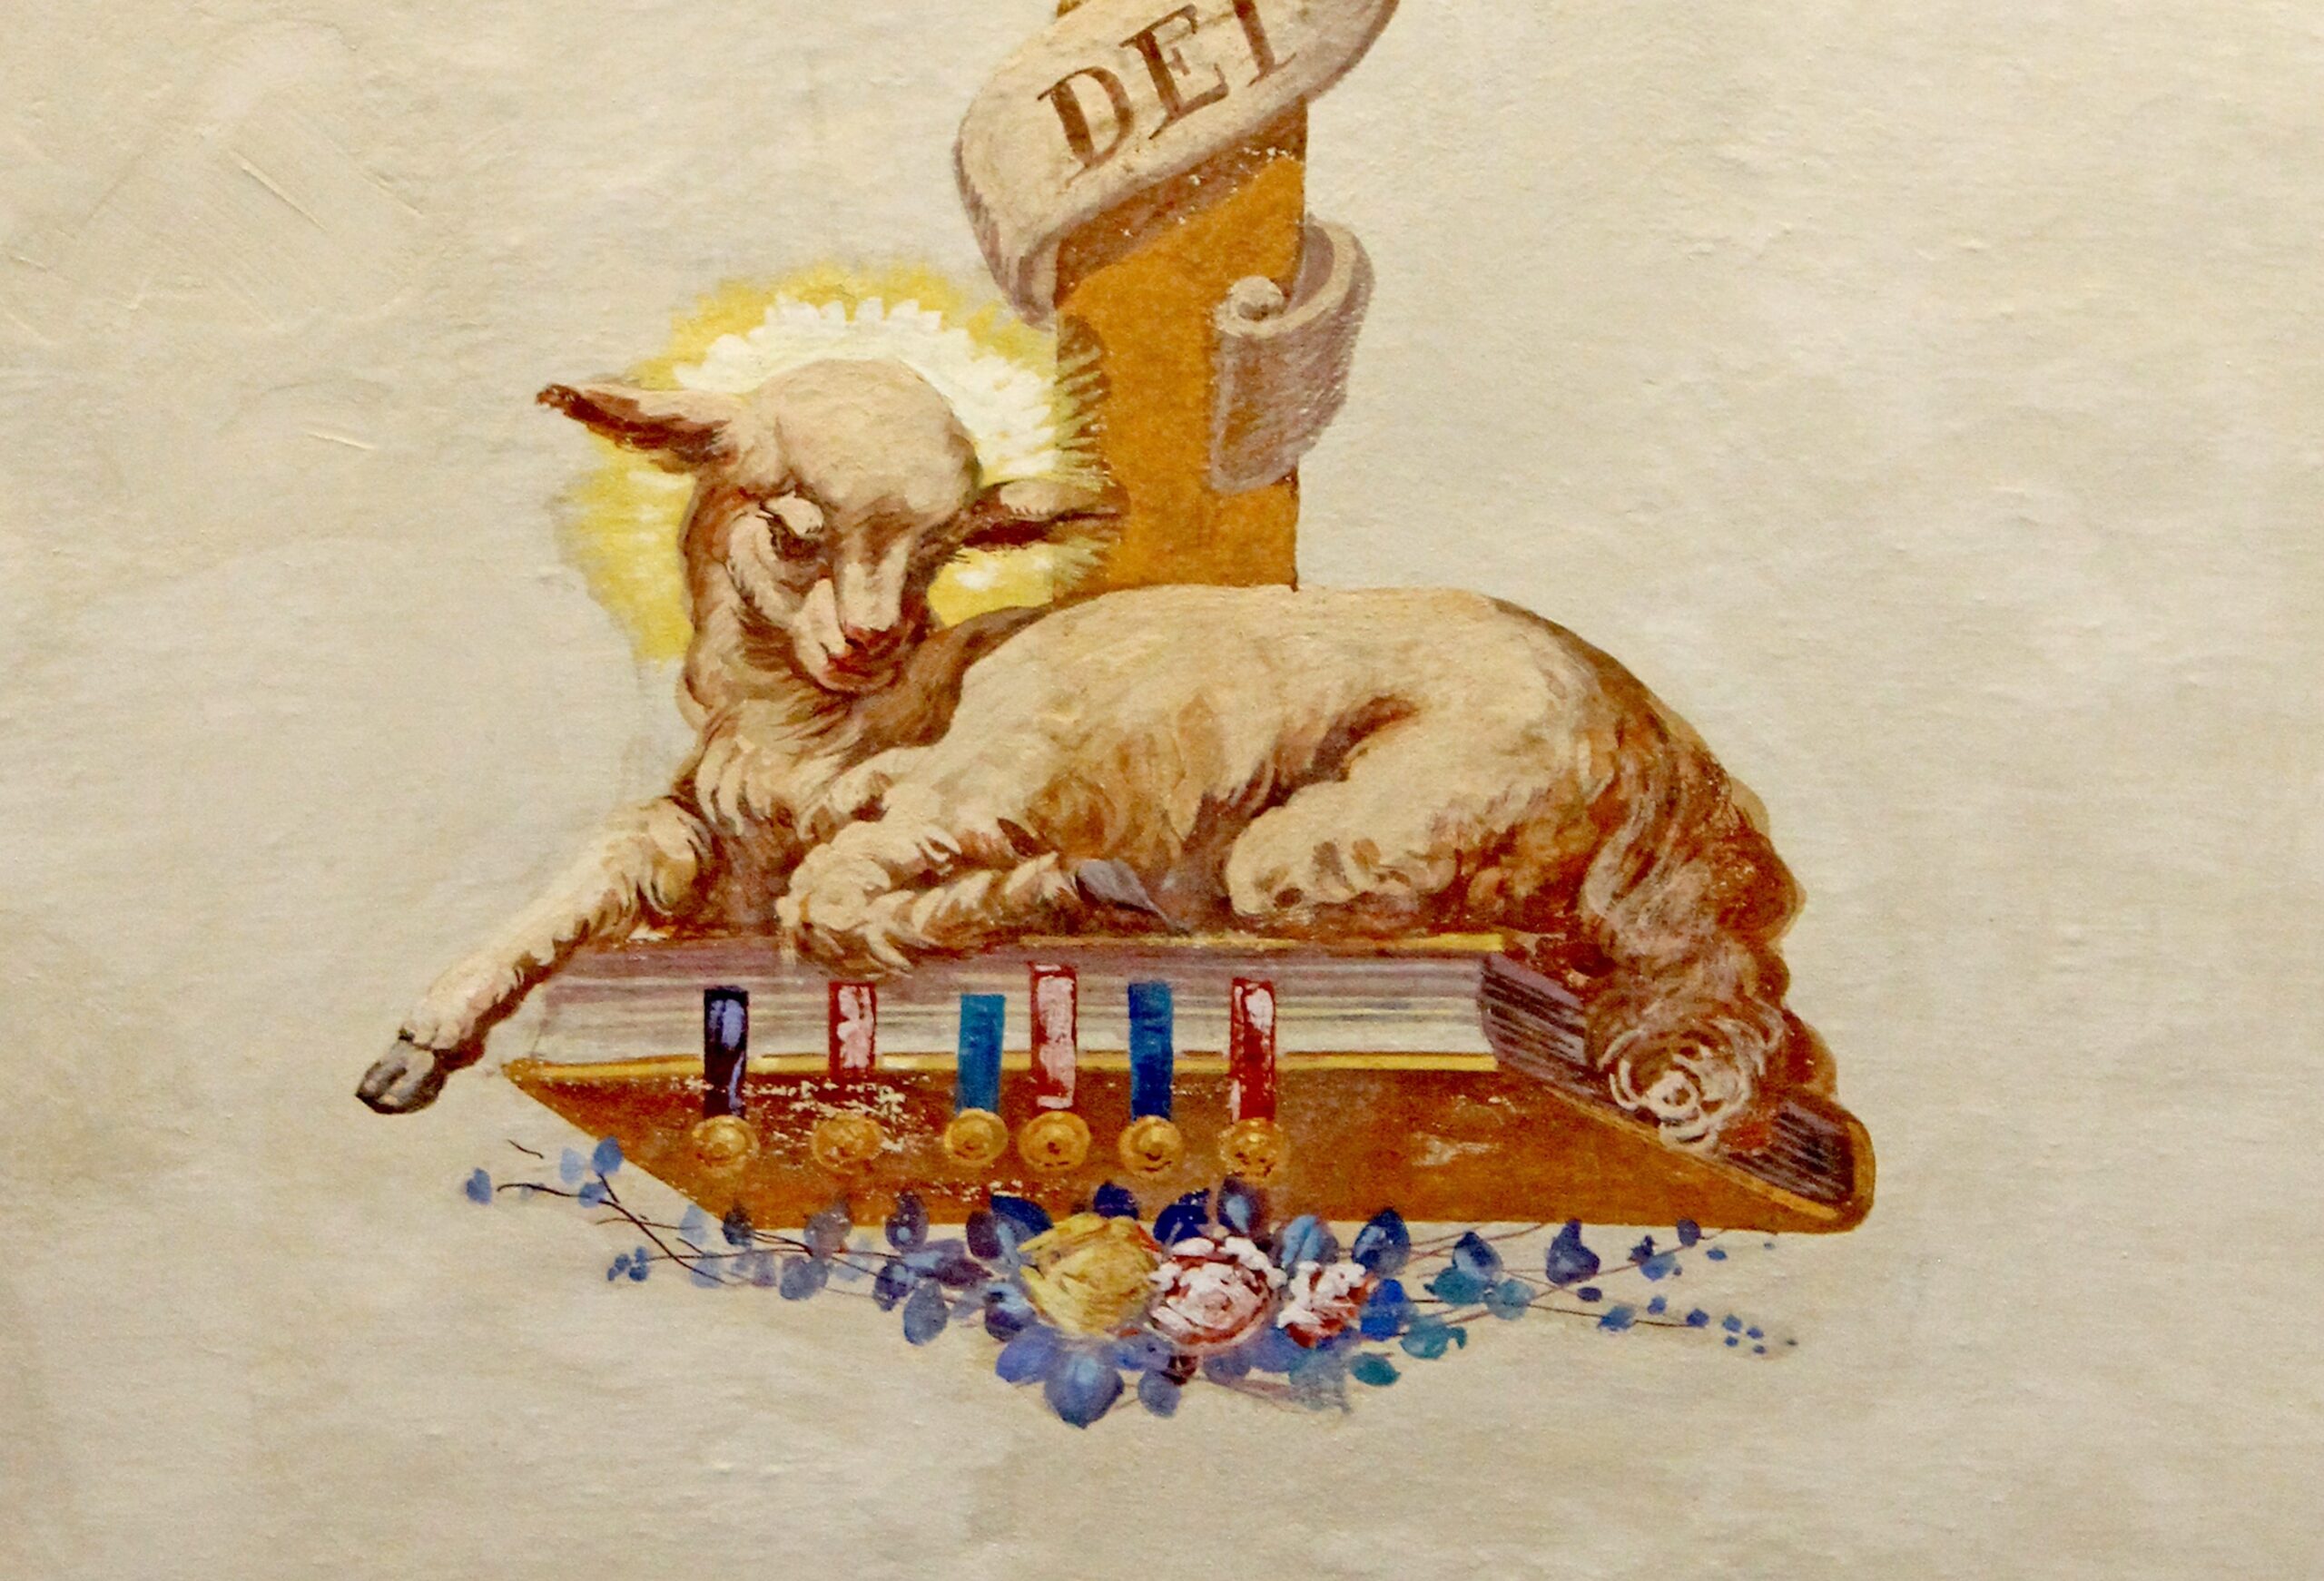 Close up of the icon of the Lamb of God seated on a book with flowers beneath it and a heavenly glow around its head.